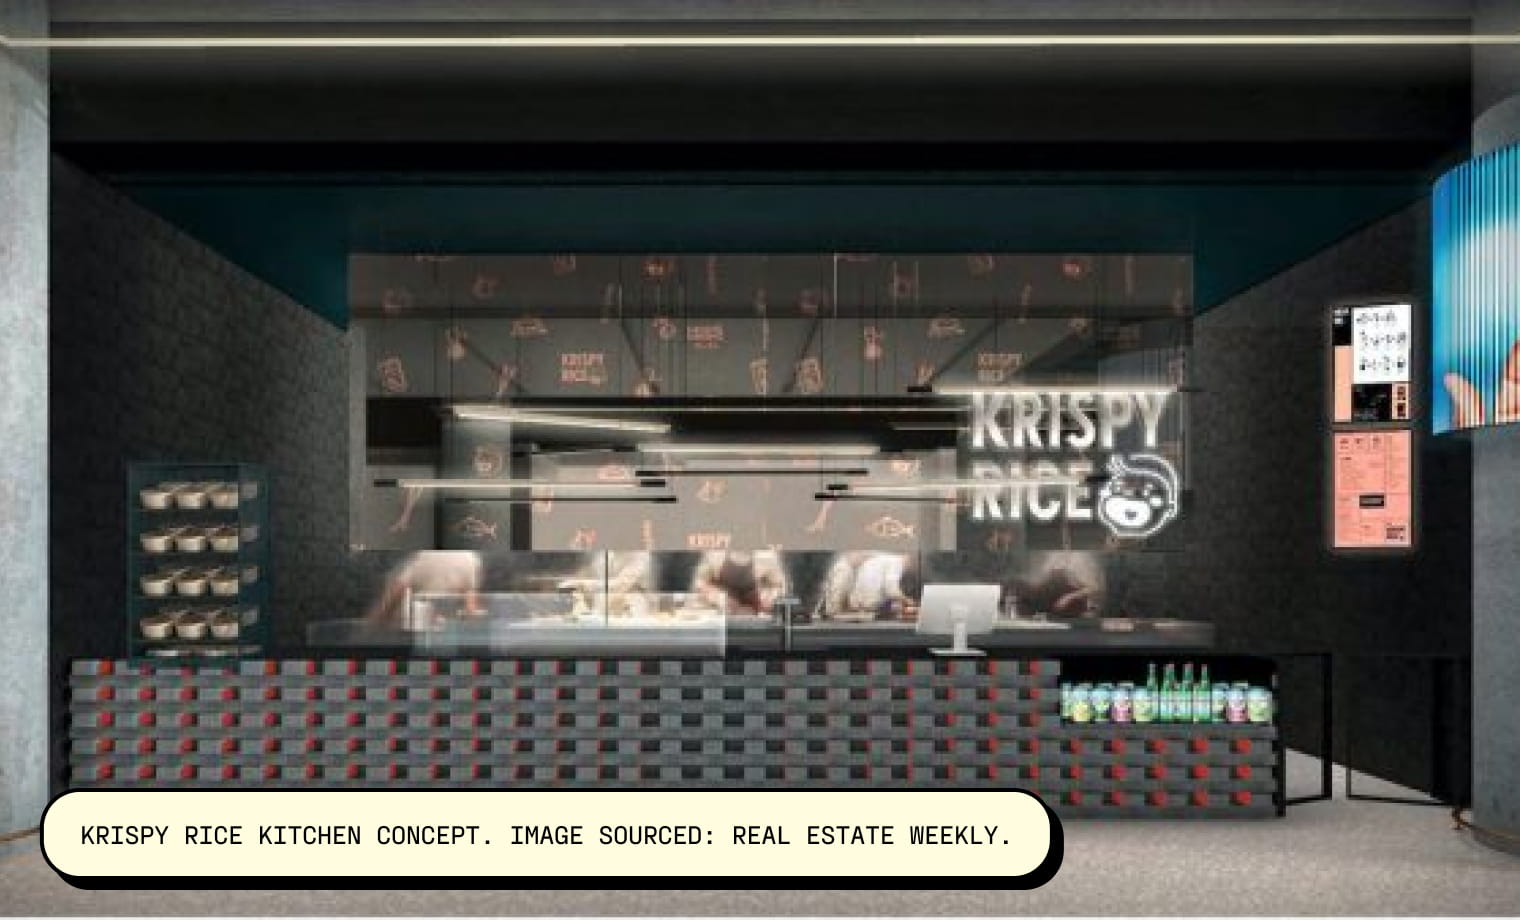 Krispy Rice Kitchen Concept. Image Sourced: Real Estate Weekly.